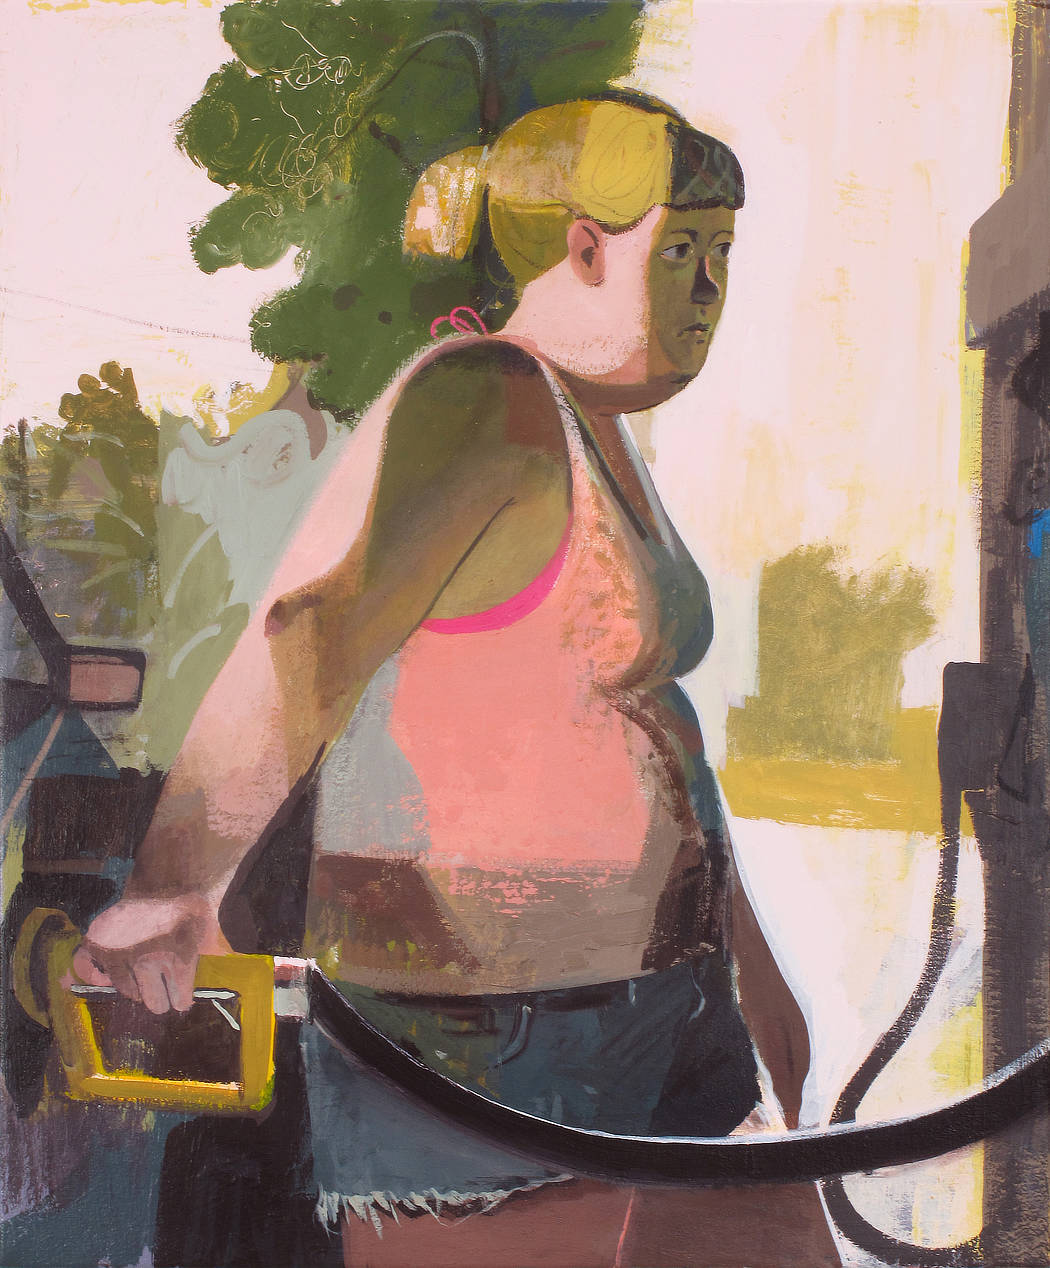 Matt Bollinger_Pump_2020_Flashe and acrylic on canvas_60 x 50 cm_Copyright the artist and mother's tankstation limited